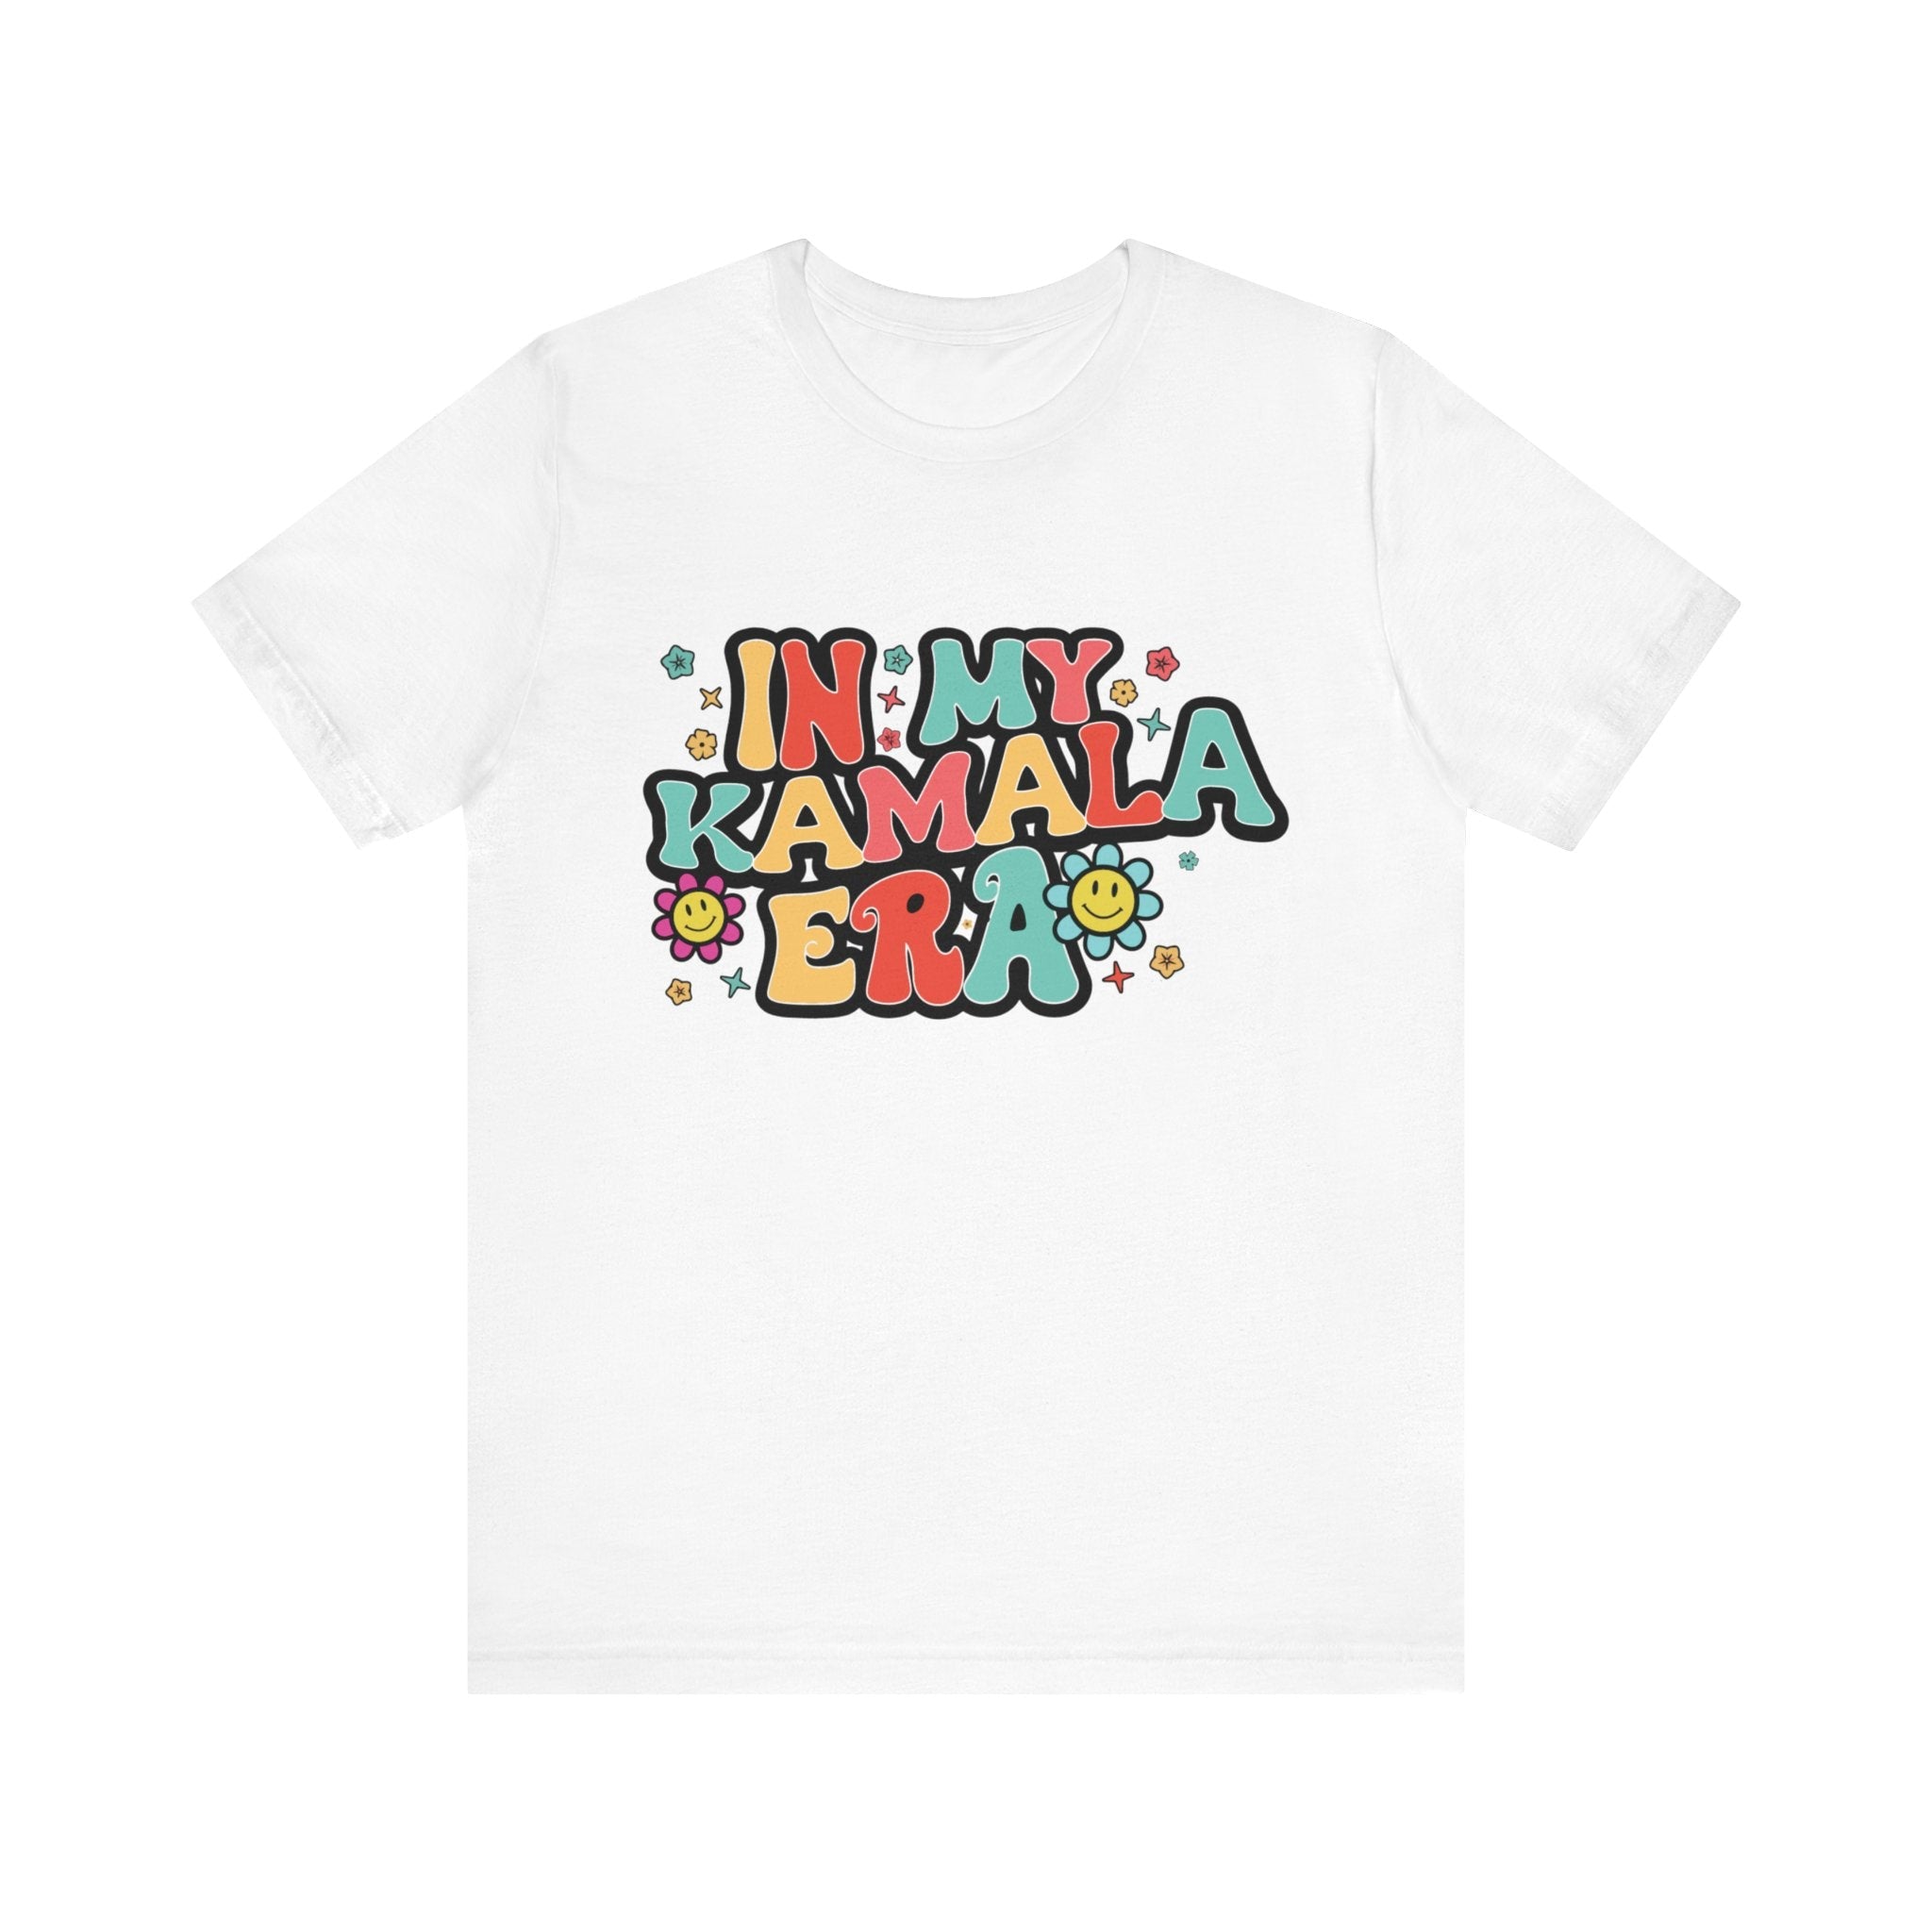 Rock Your Strength with the ’In My Kamala Era’ Tee! - White / S - T-Shirt